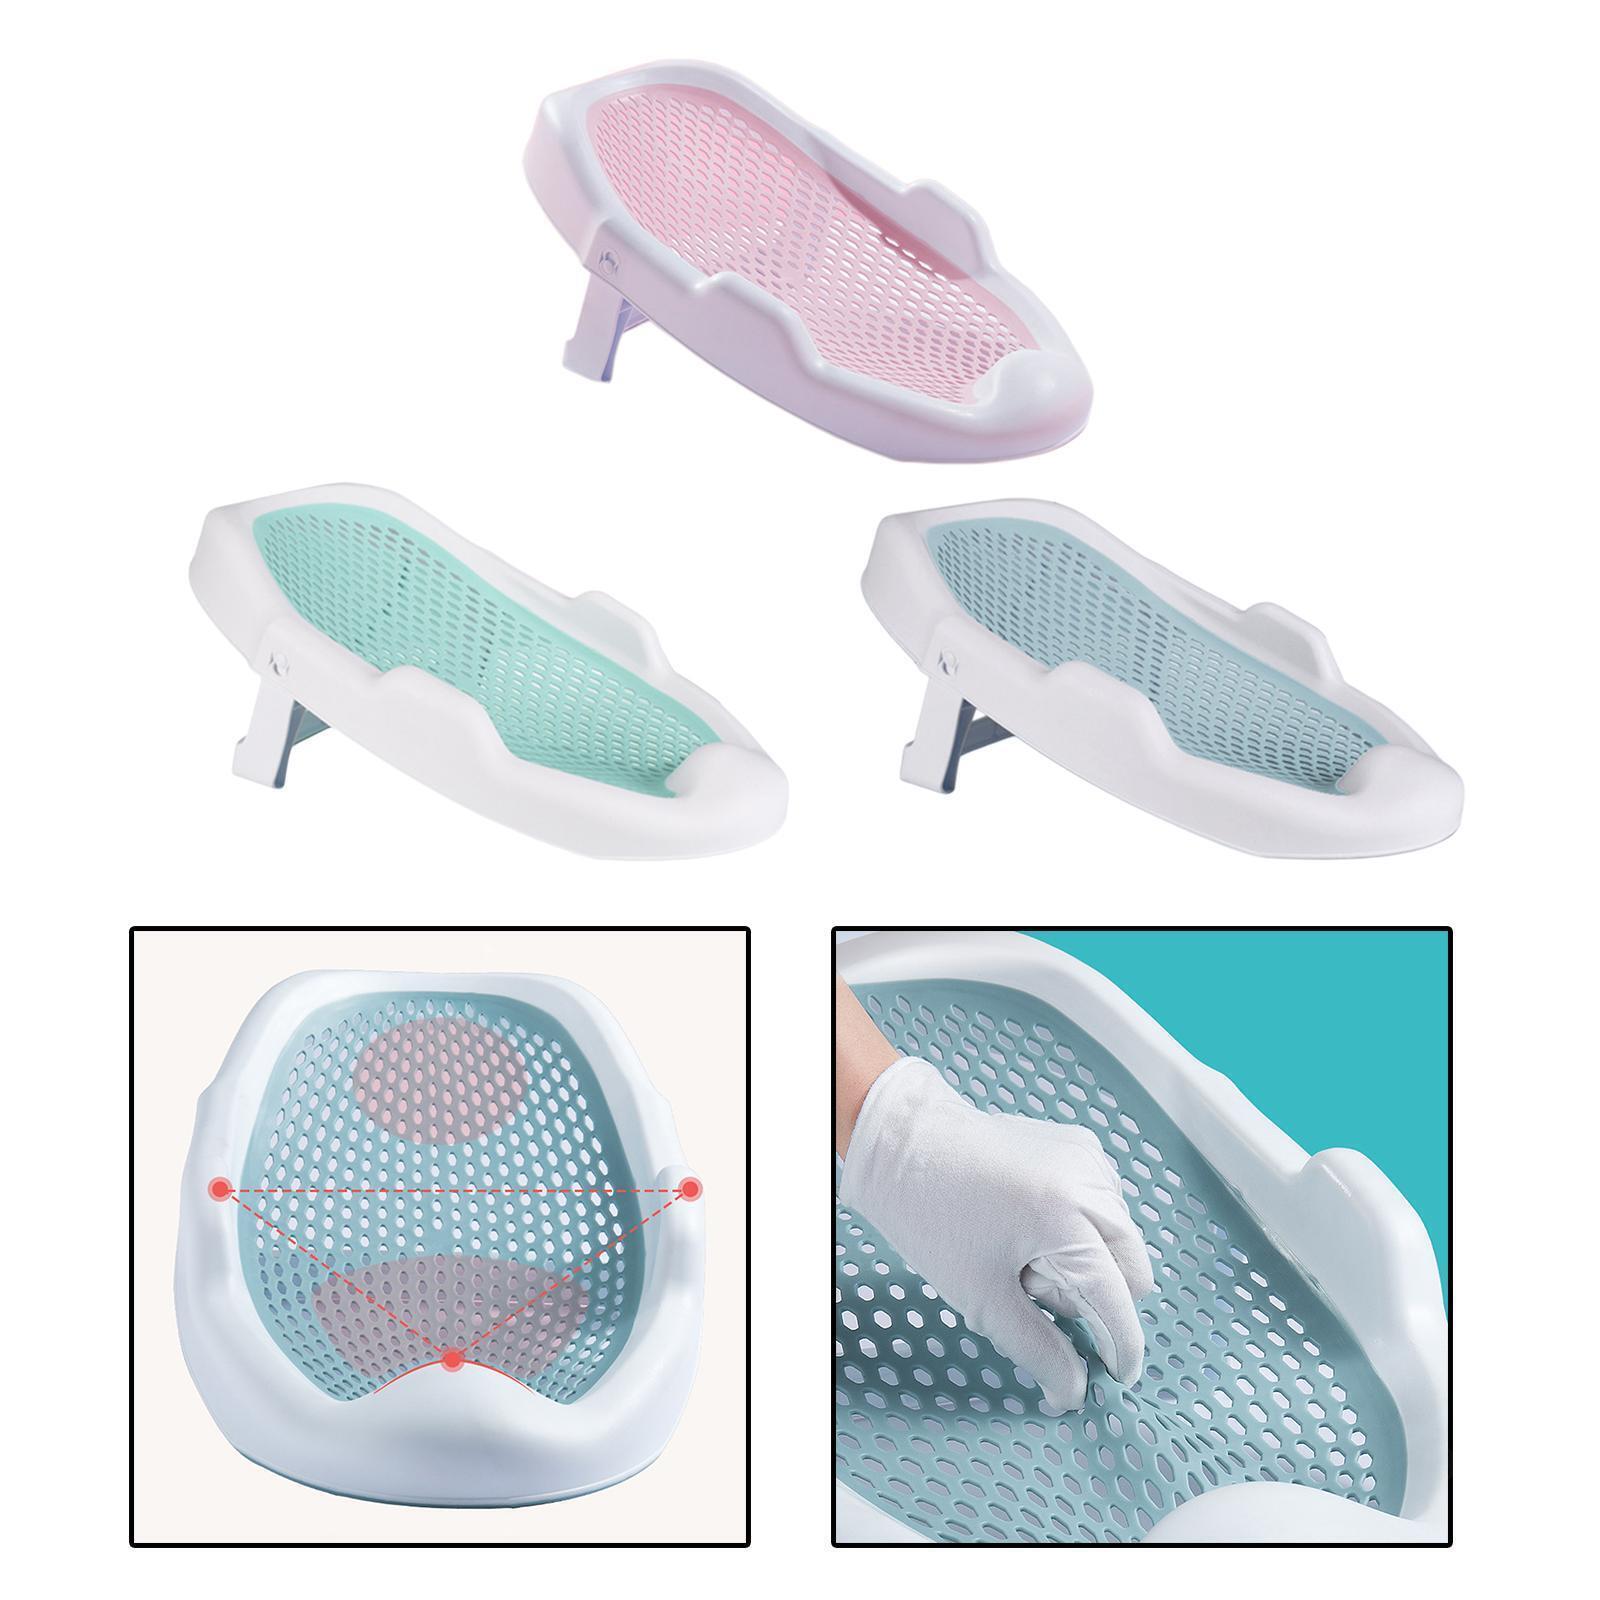 Foldable Baby Bath Seat Support Rack Soft Tpe Comfortable Non Slip For Baby